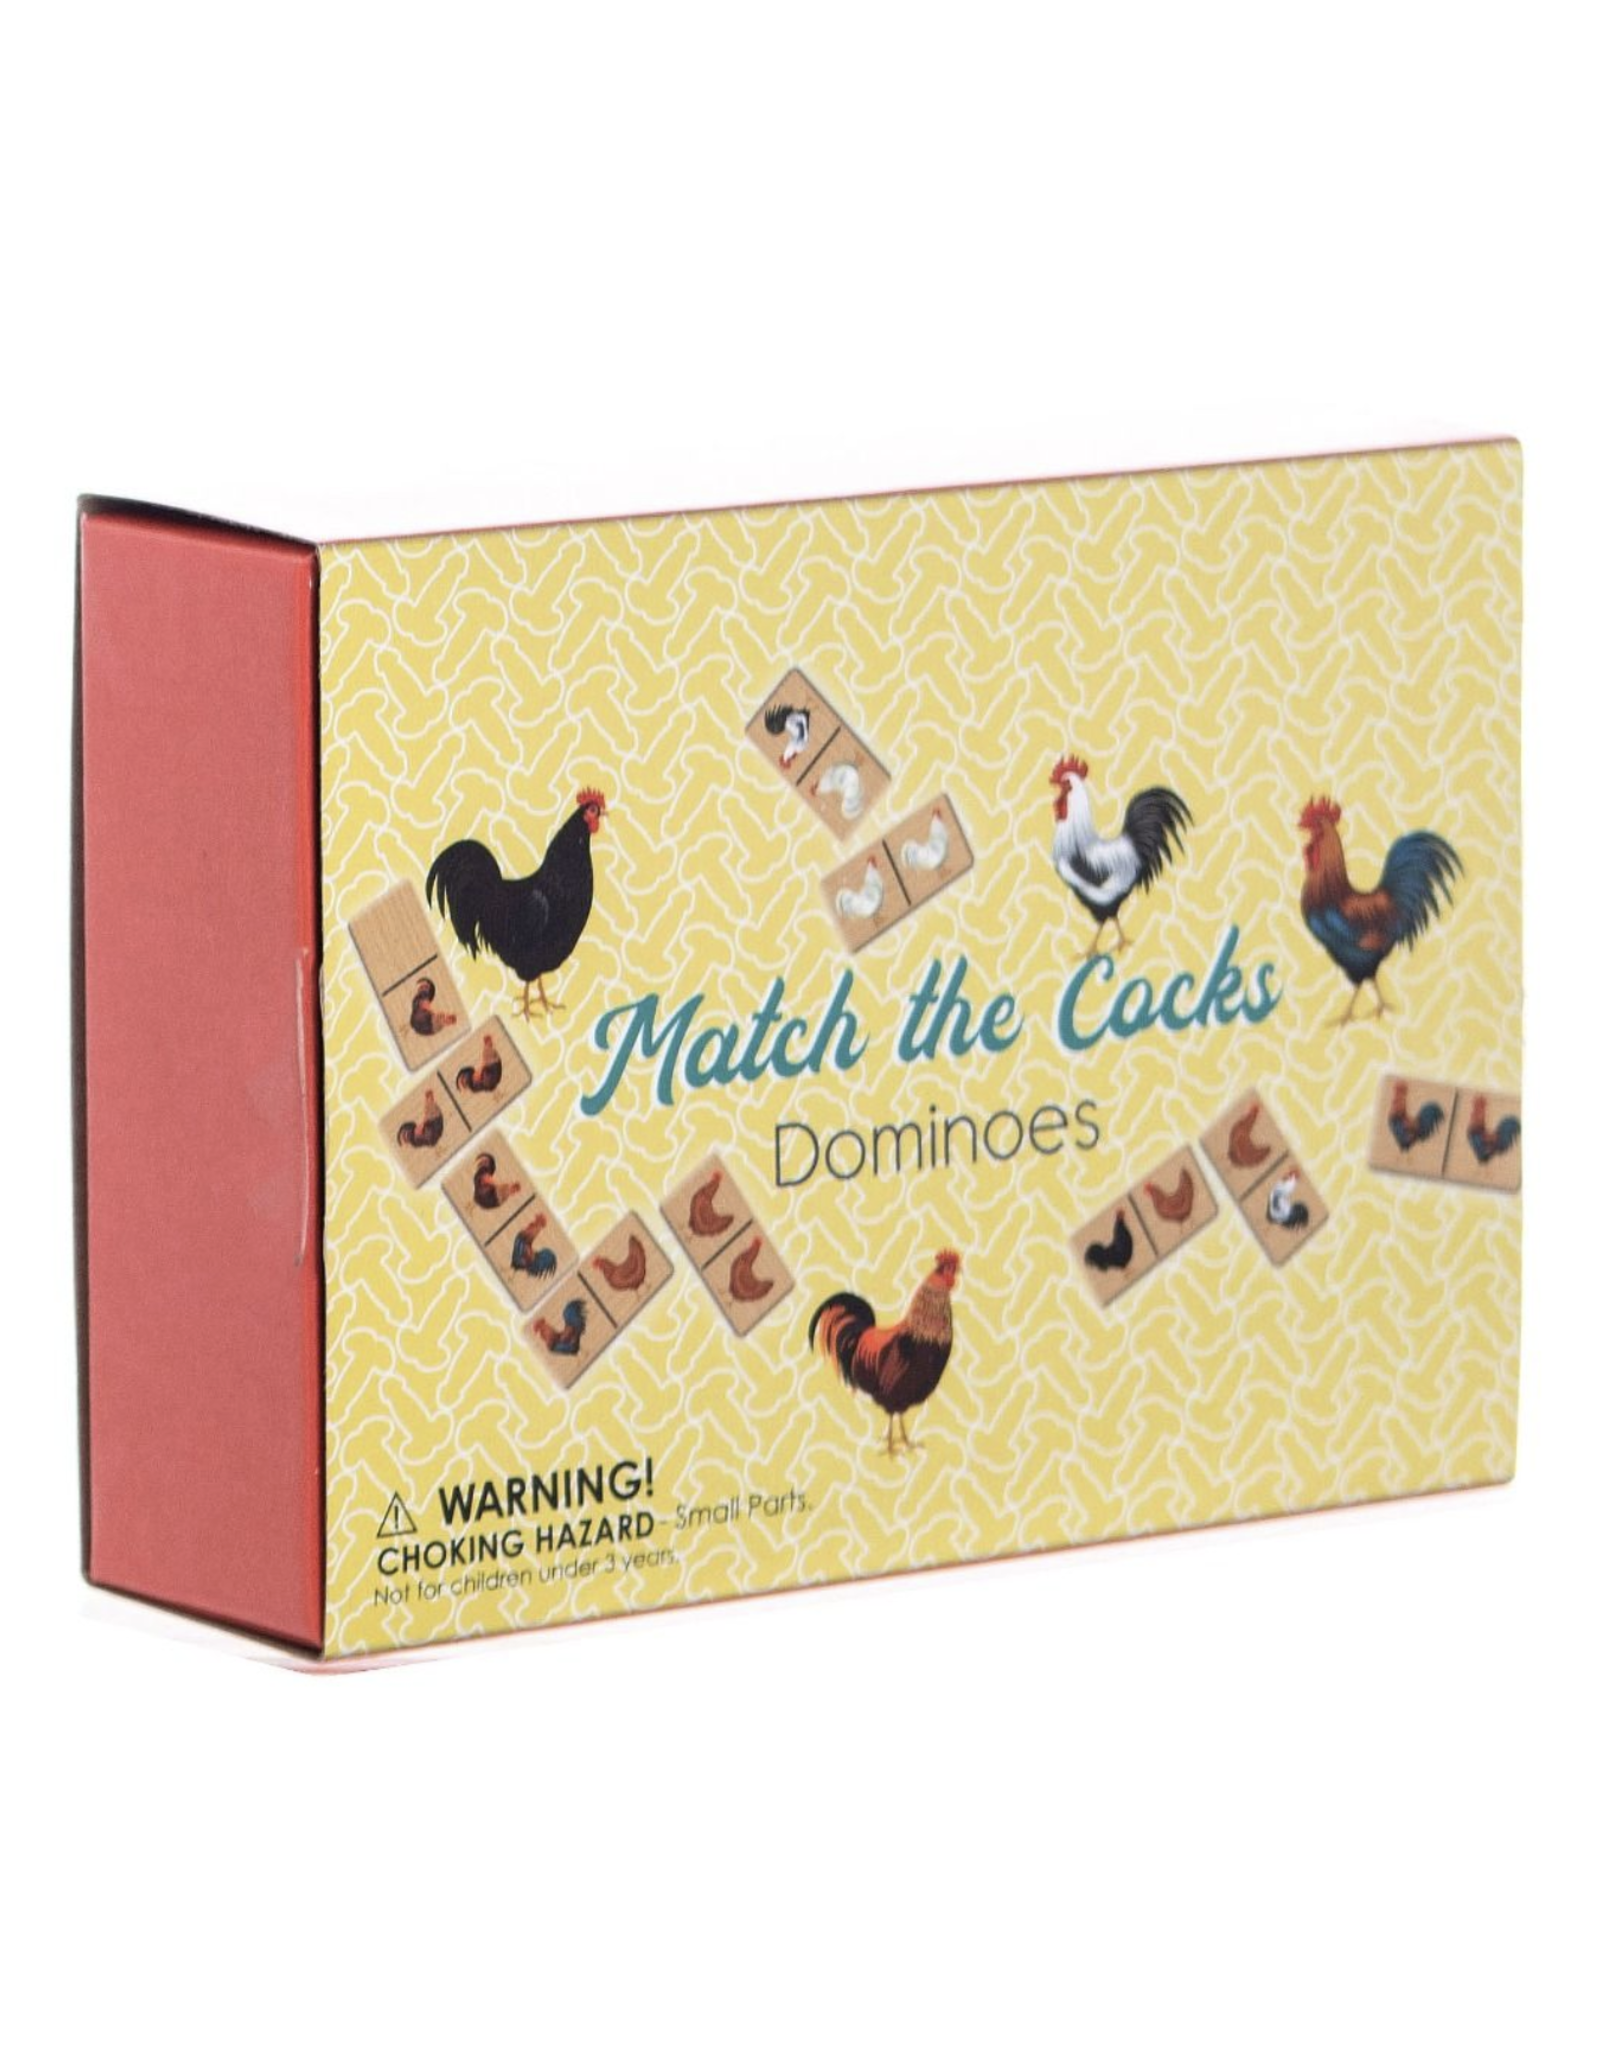 Match The Cocks Dominoes  - Chickens and Adult Content